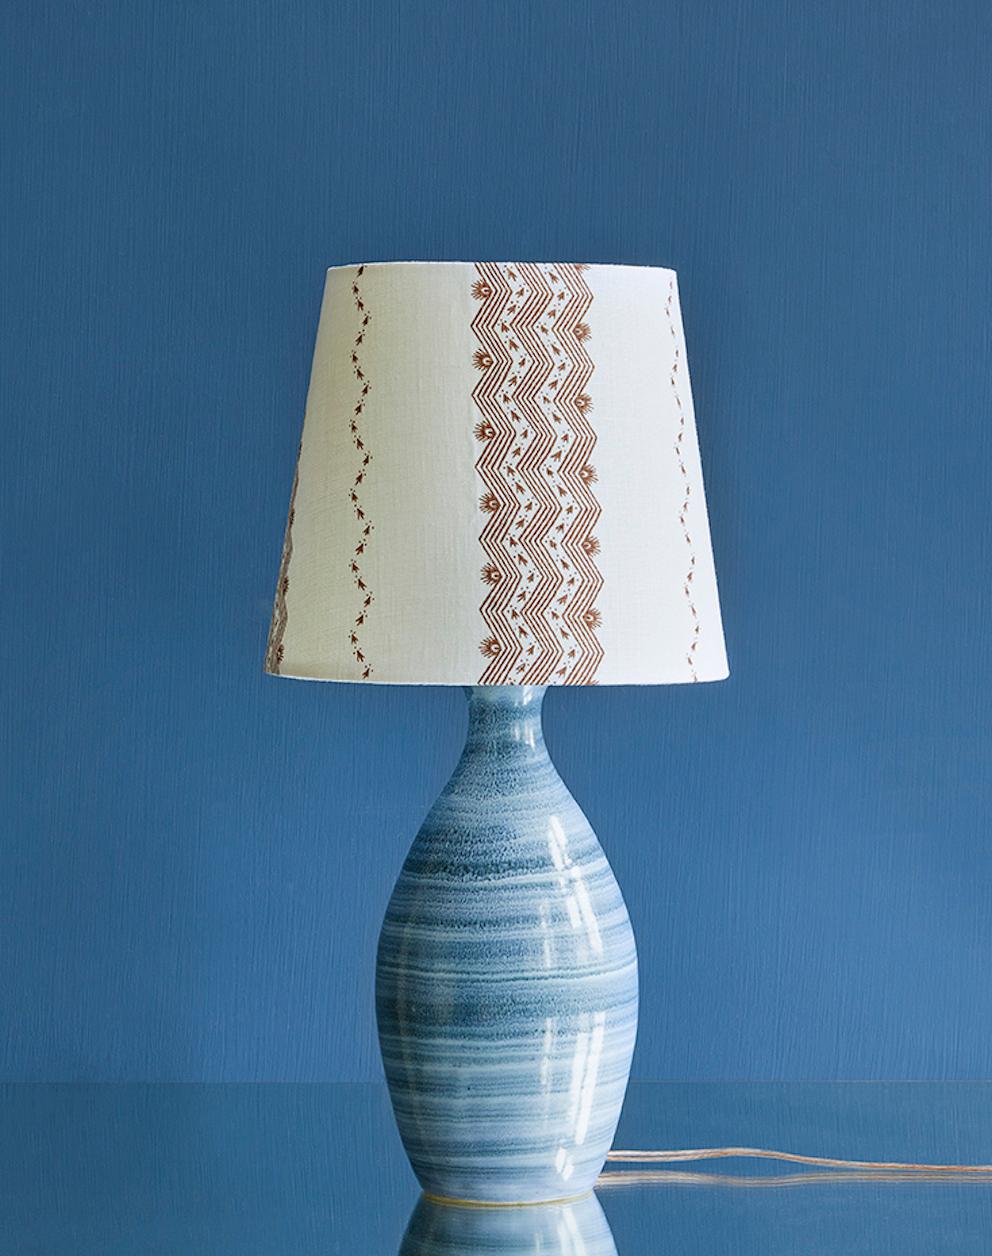 France, 1970's

Ceramic table lampe in blue glaze with customized shade by The Apartment.

H 43 x Ø 22 cm